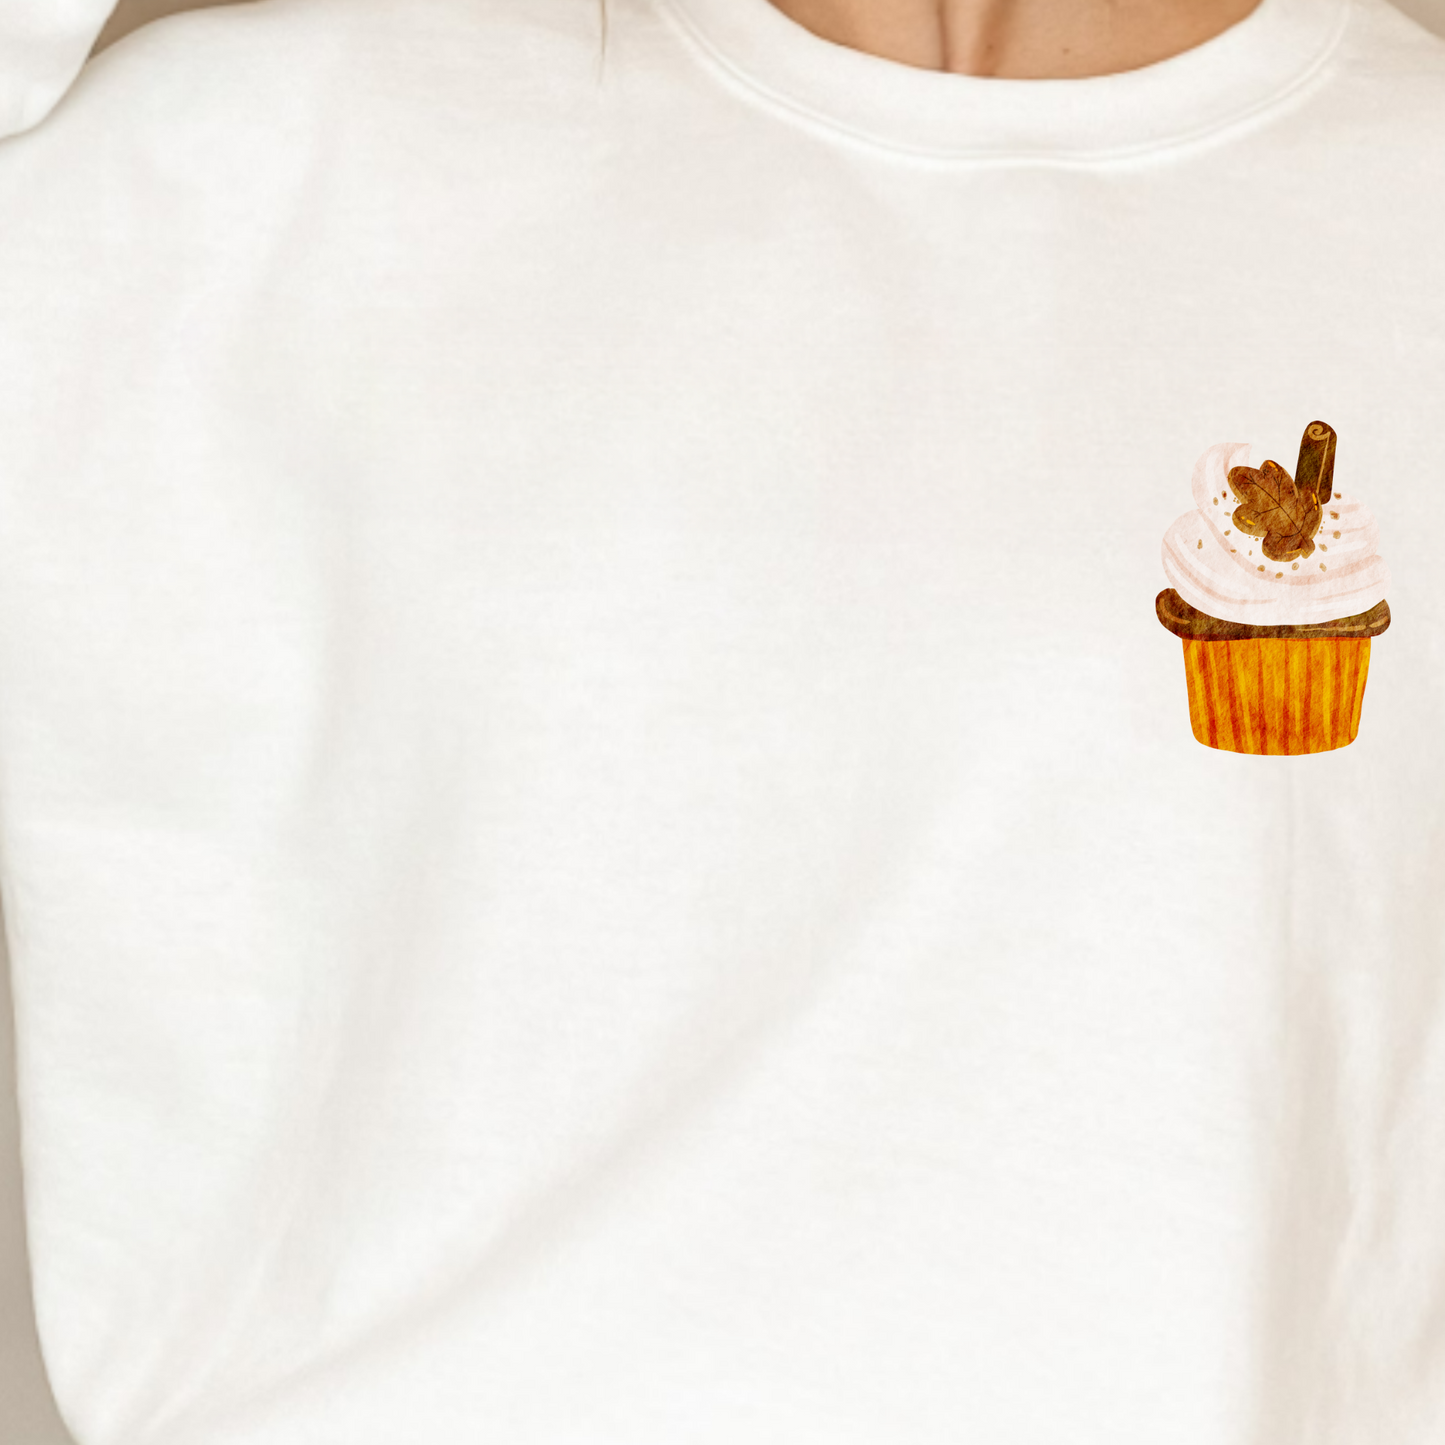 (Shirt not included) Spiced Cupcake POCKET - Clear Film Transfer